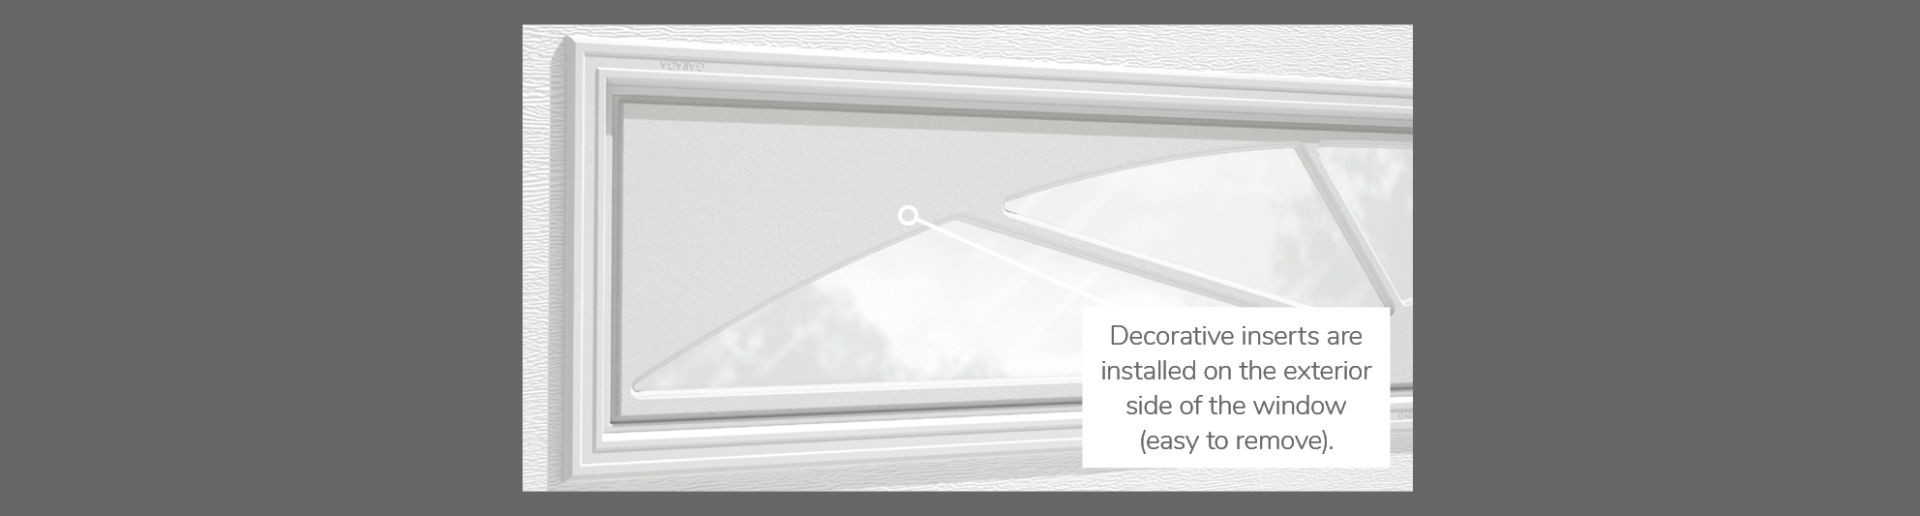 Williamsburg Decorative Insert, 40" x 13", available for door R-16, R-12, 2 layers polystyrene and Non-insulated